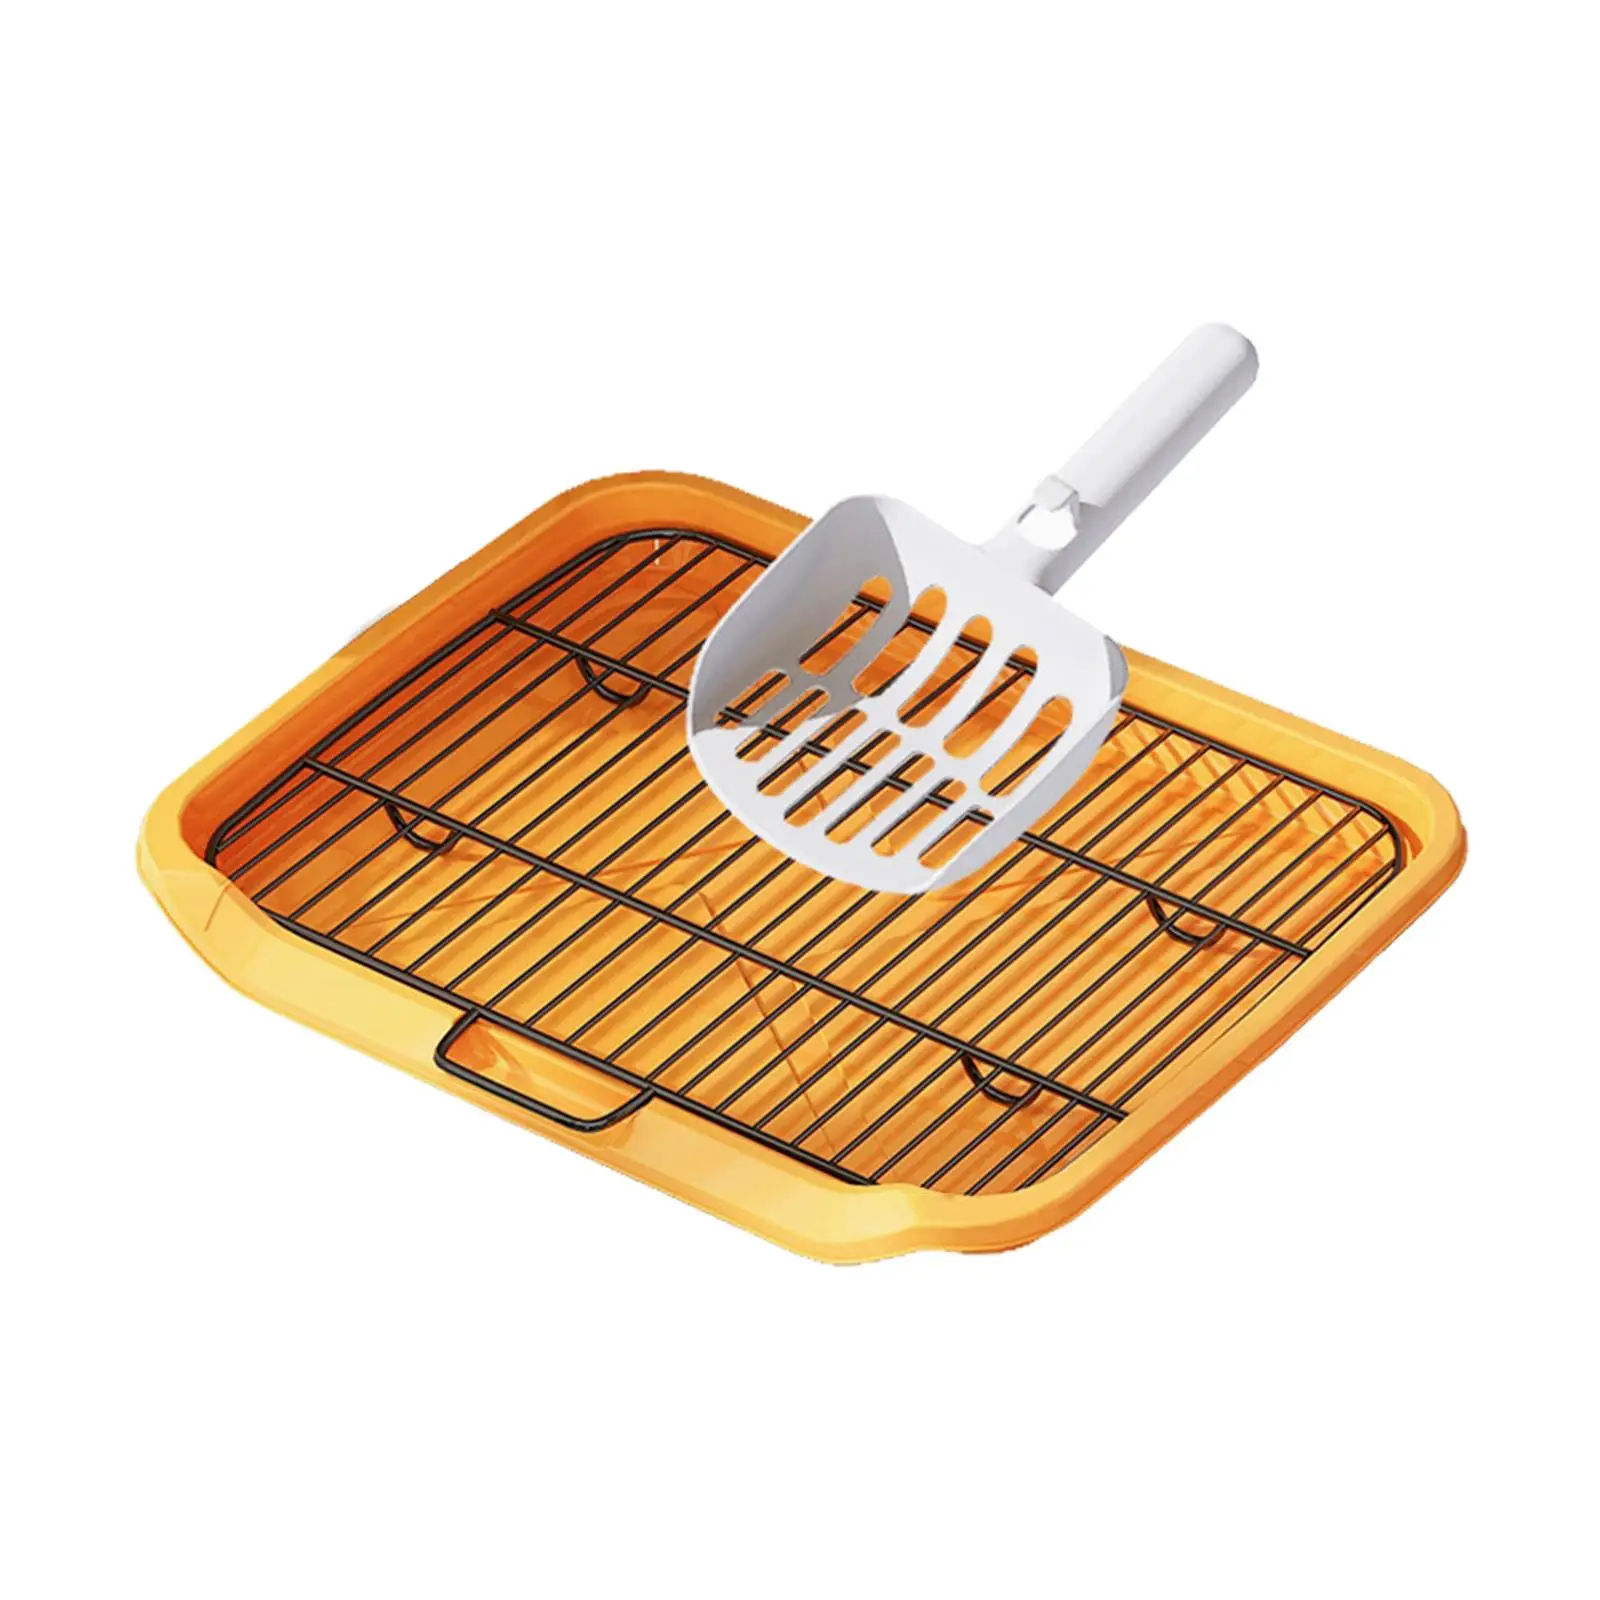 Dog toilet training toilet trays for small and medium sized dogs,